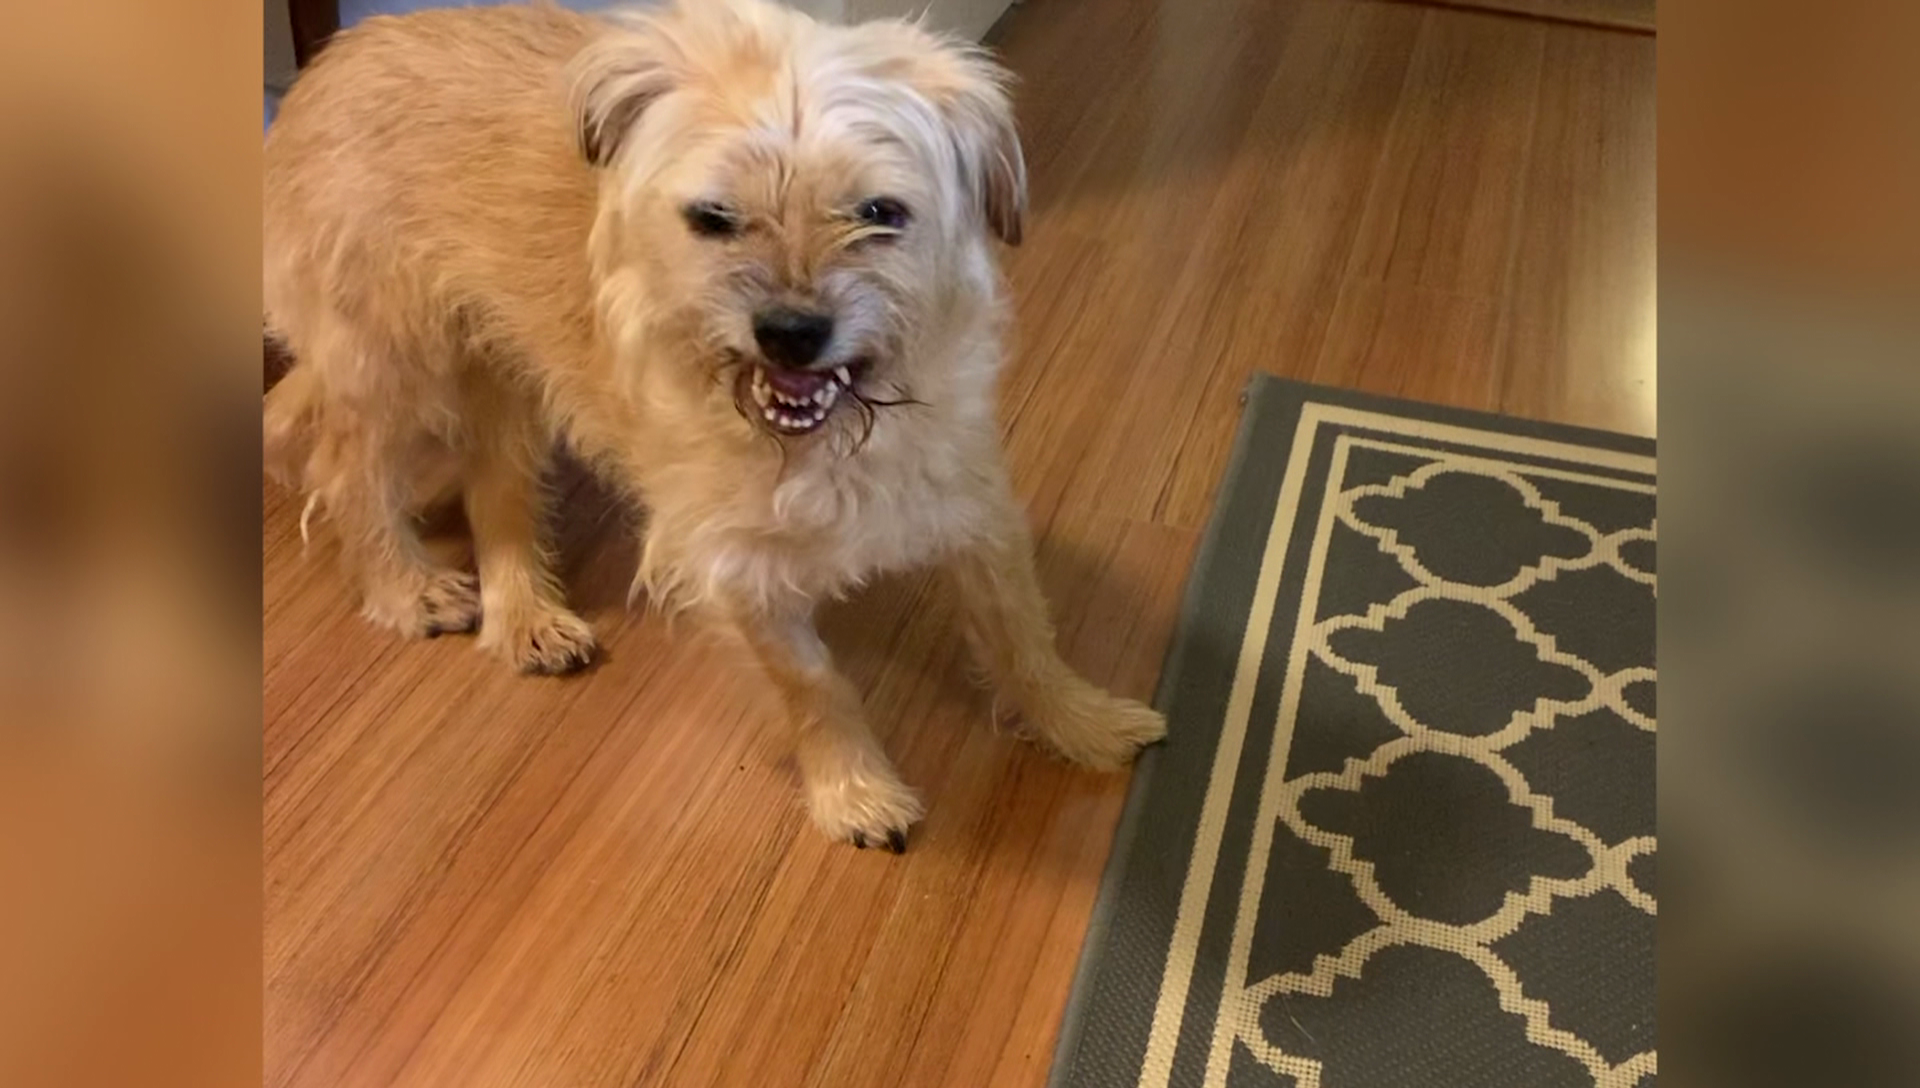 A beige, scruffy dog stands with its mouth open on a hardwood floor